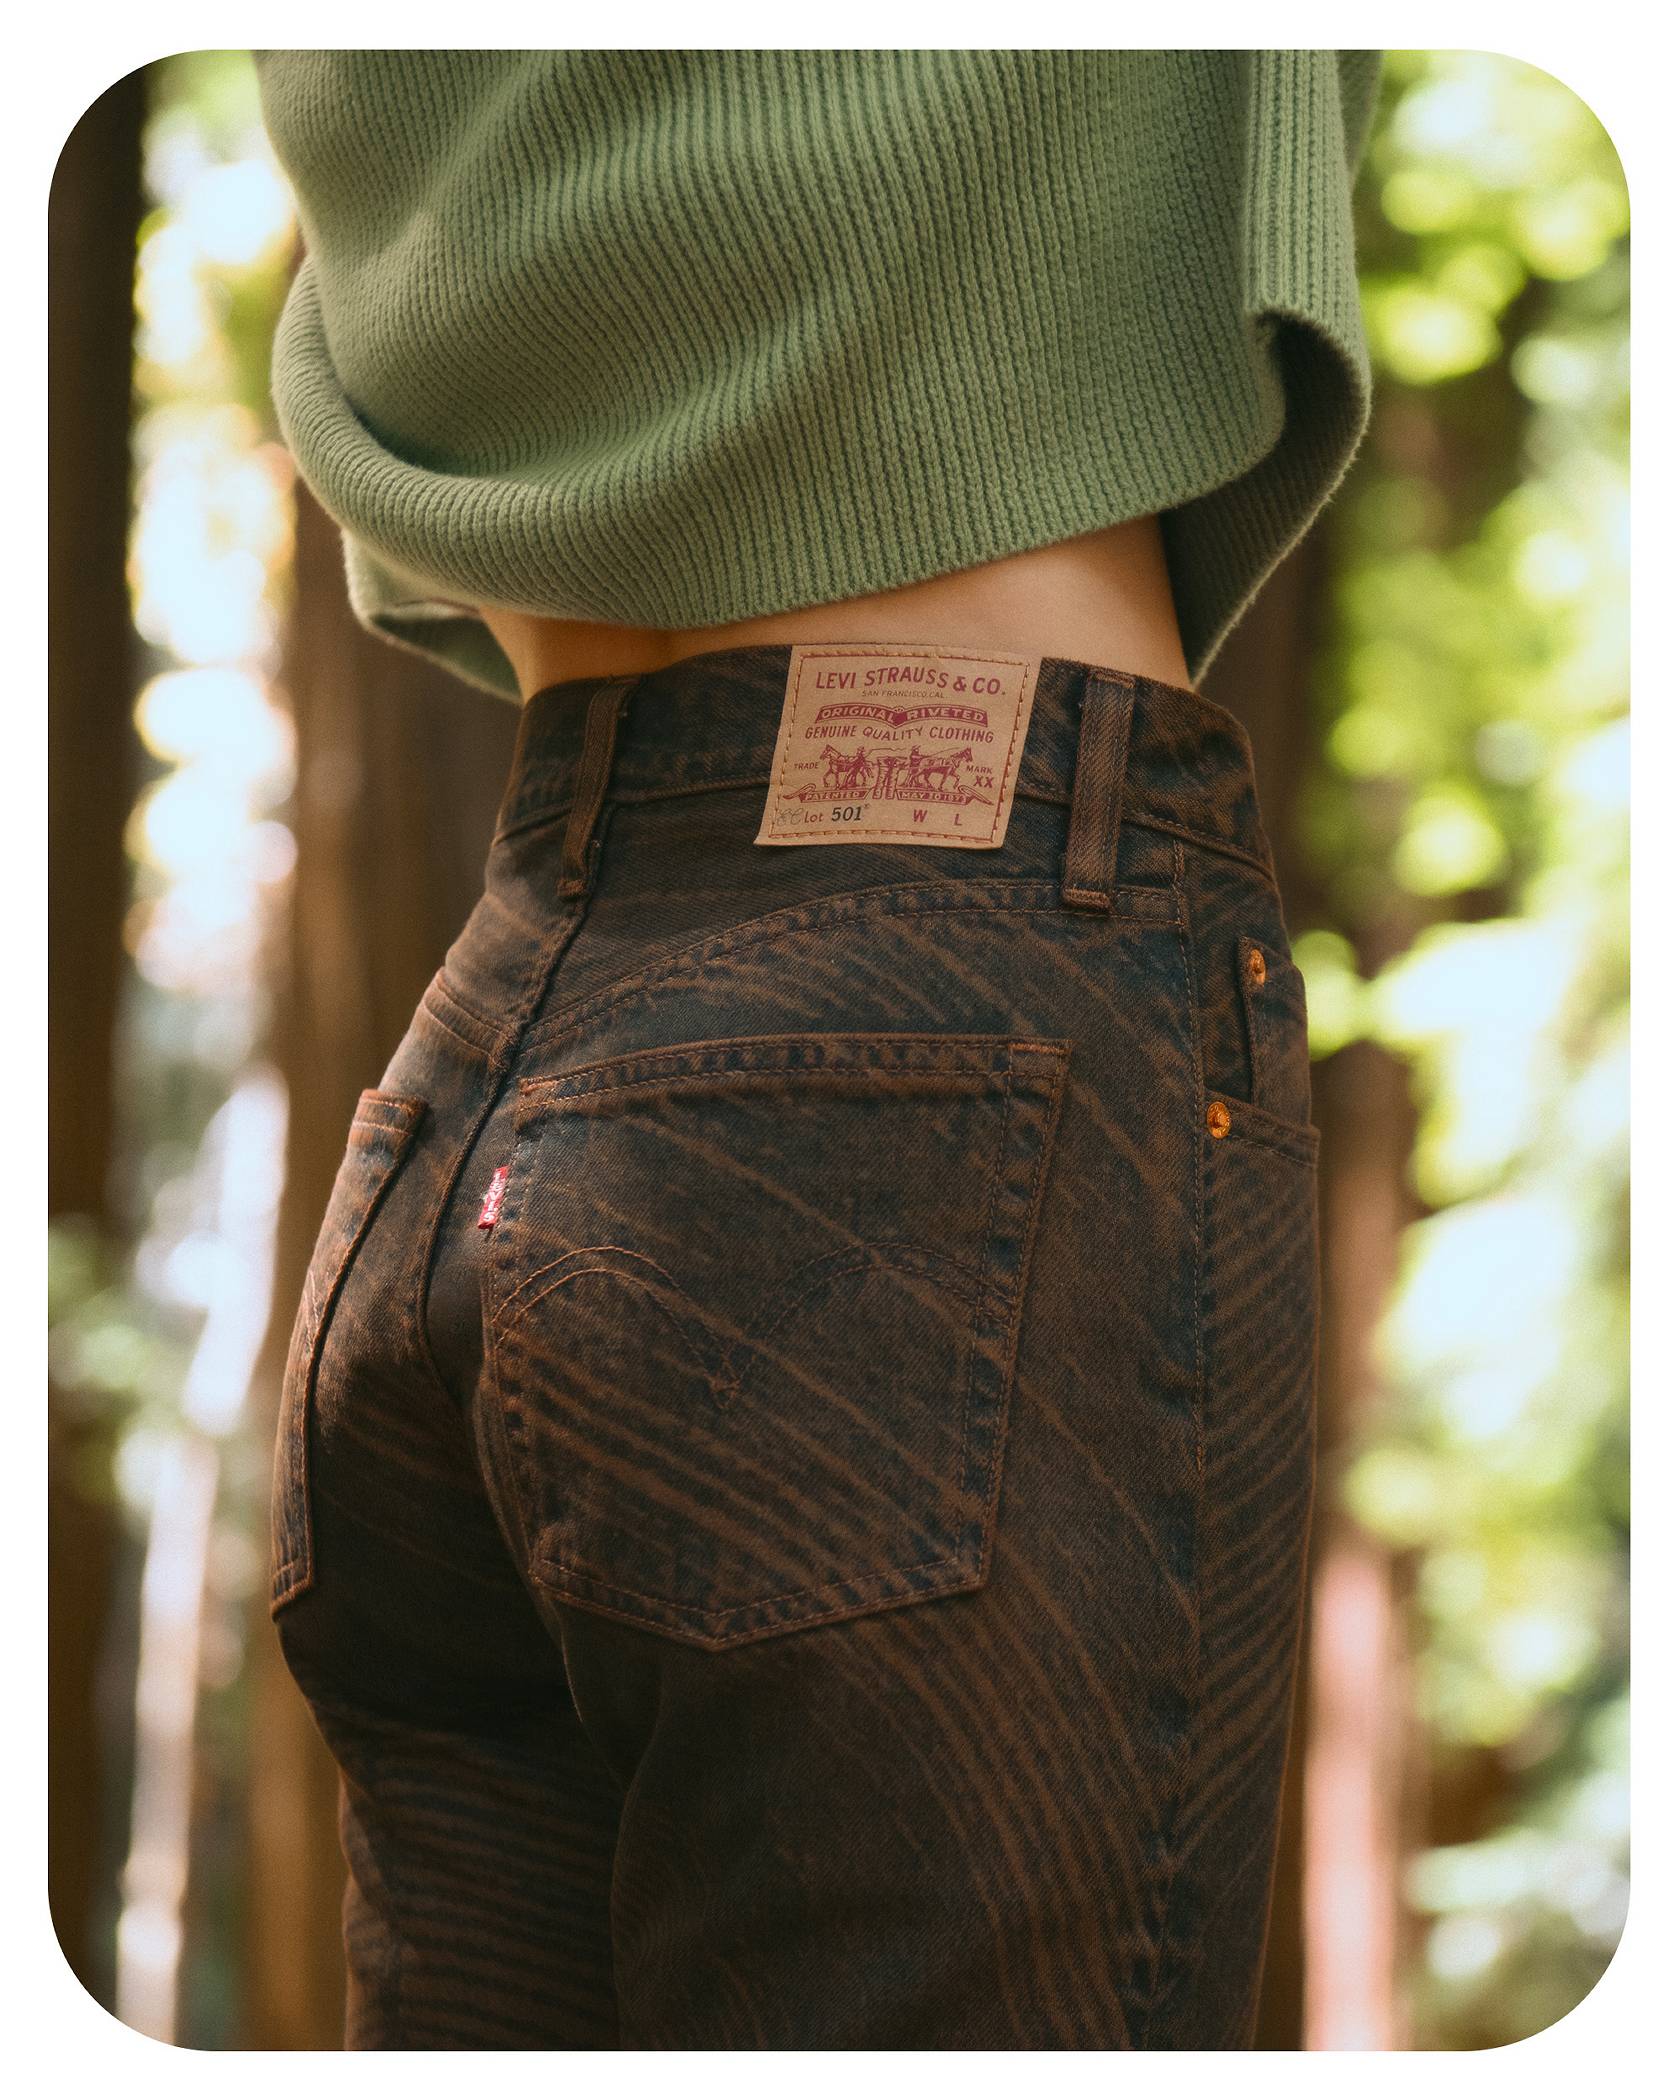 Image featuring Levi's® x Emma Chamberlain pants with redwood tree ring print detail